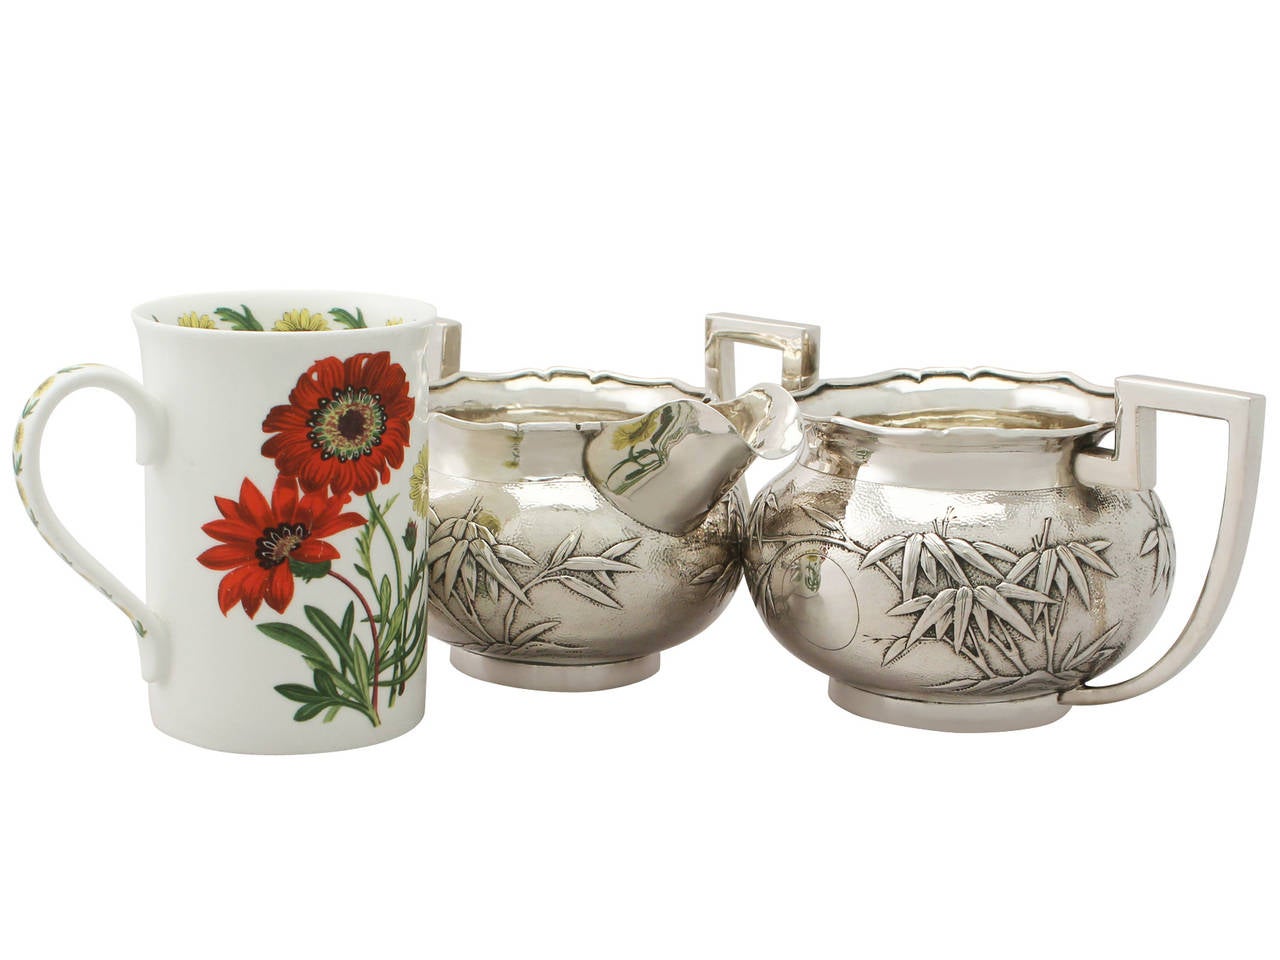 A fine Chinese Export silver creamer and sugar bowl; part of our Asian silverware collection.

This fine antique Chinese Export Silver (CES) cream jug and sugar bowl have an oval rounded form onto a collet foot.

This antique silver sugar bowl